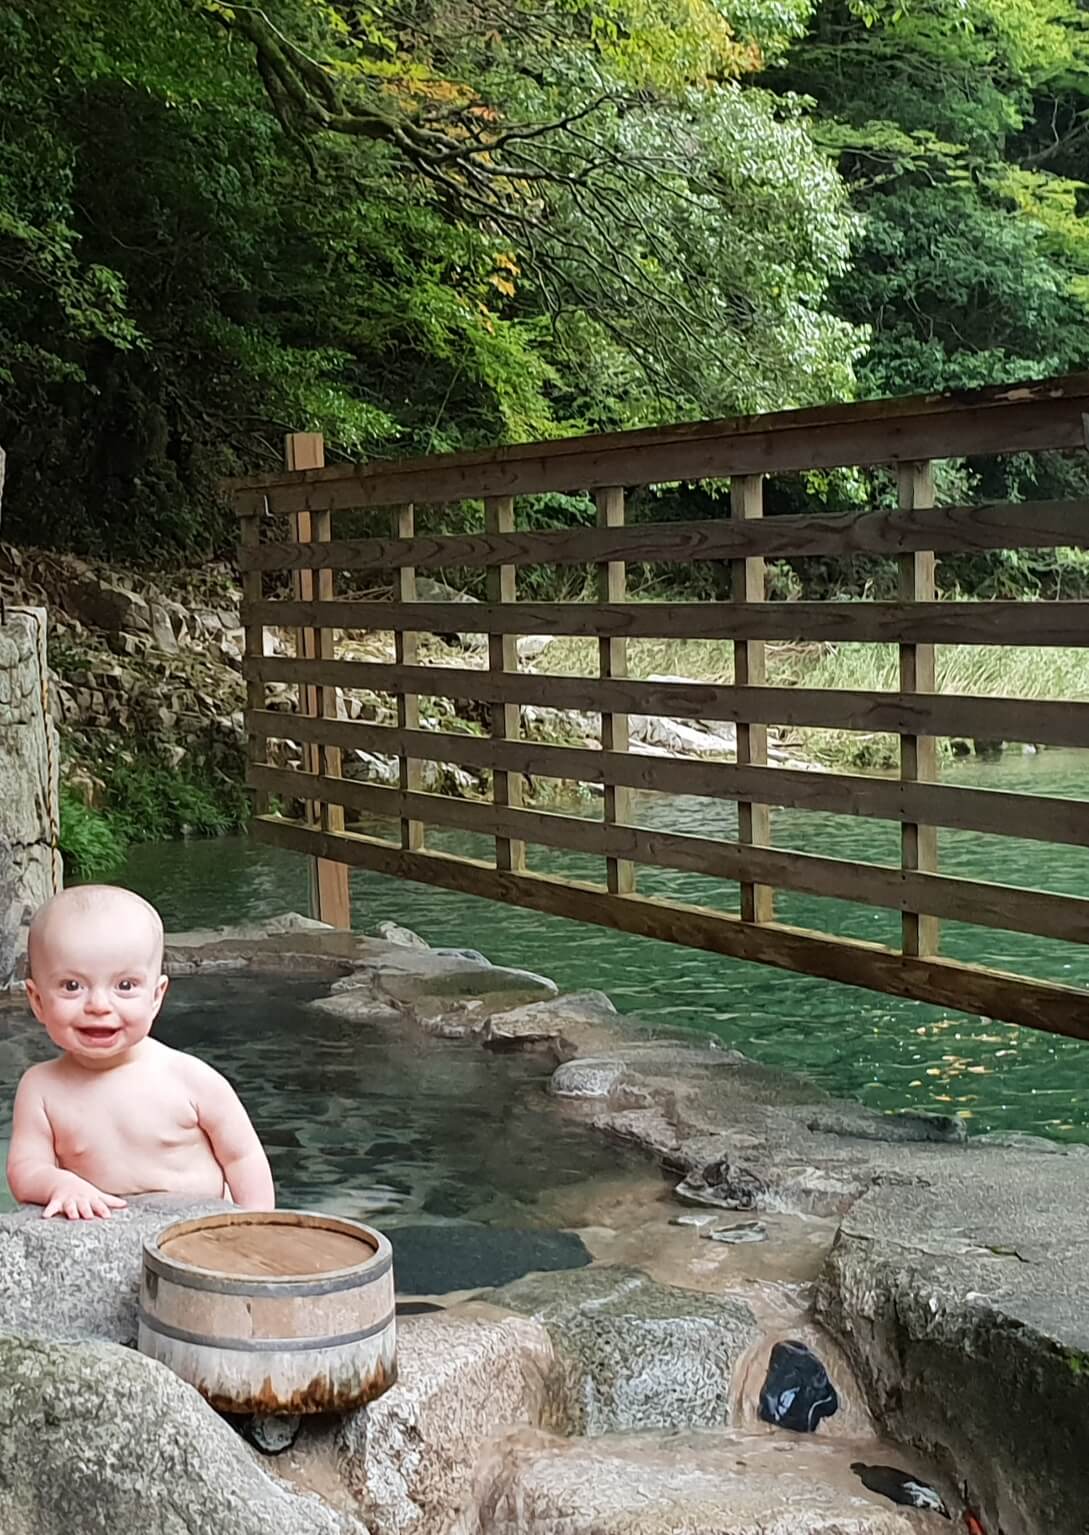 Baby smiling in a hot spring pool.